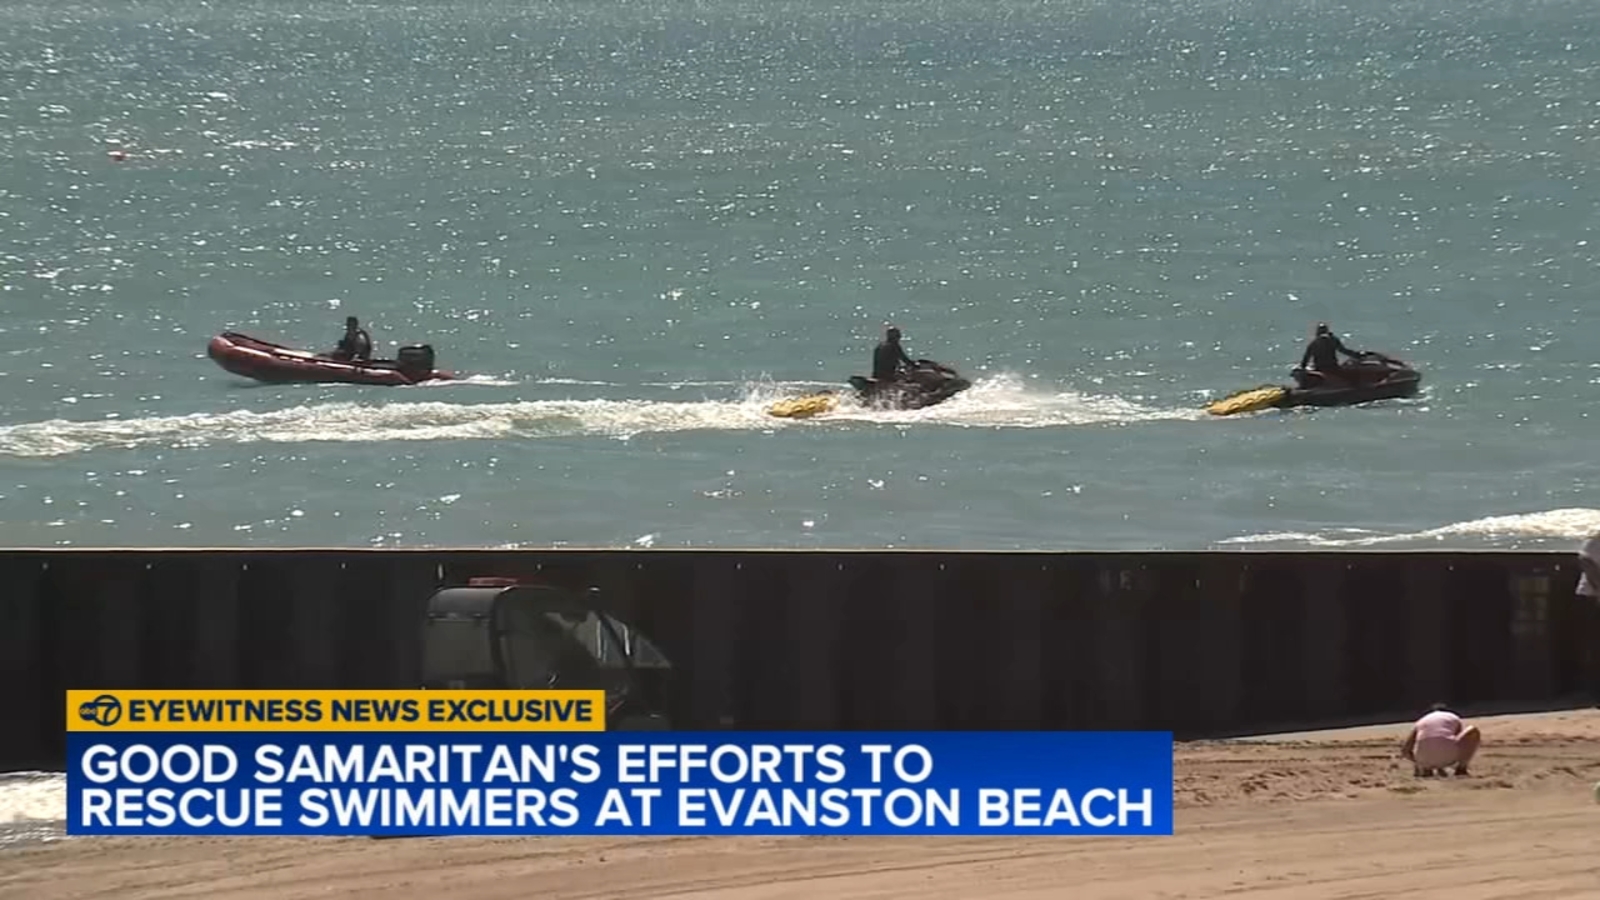 Evanston Fire Department again suspends Lake Michigan search for missing swimmer at Lighthouse Beach [Video]